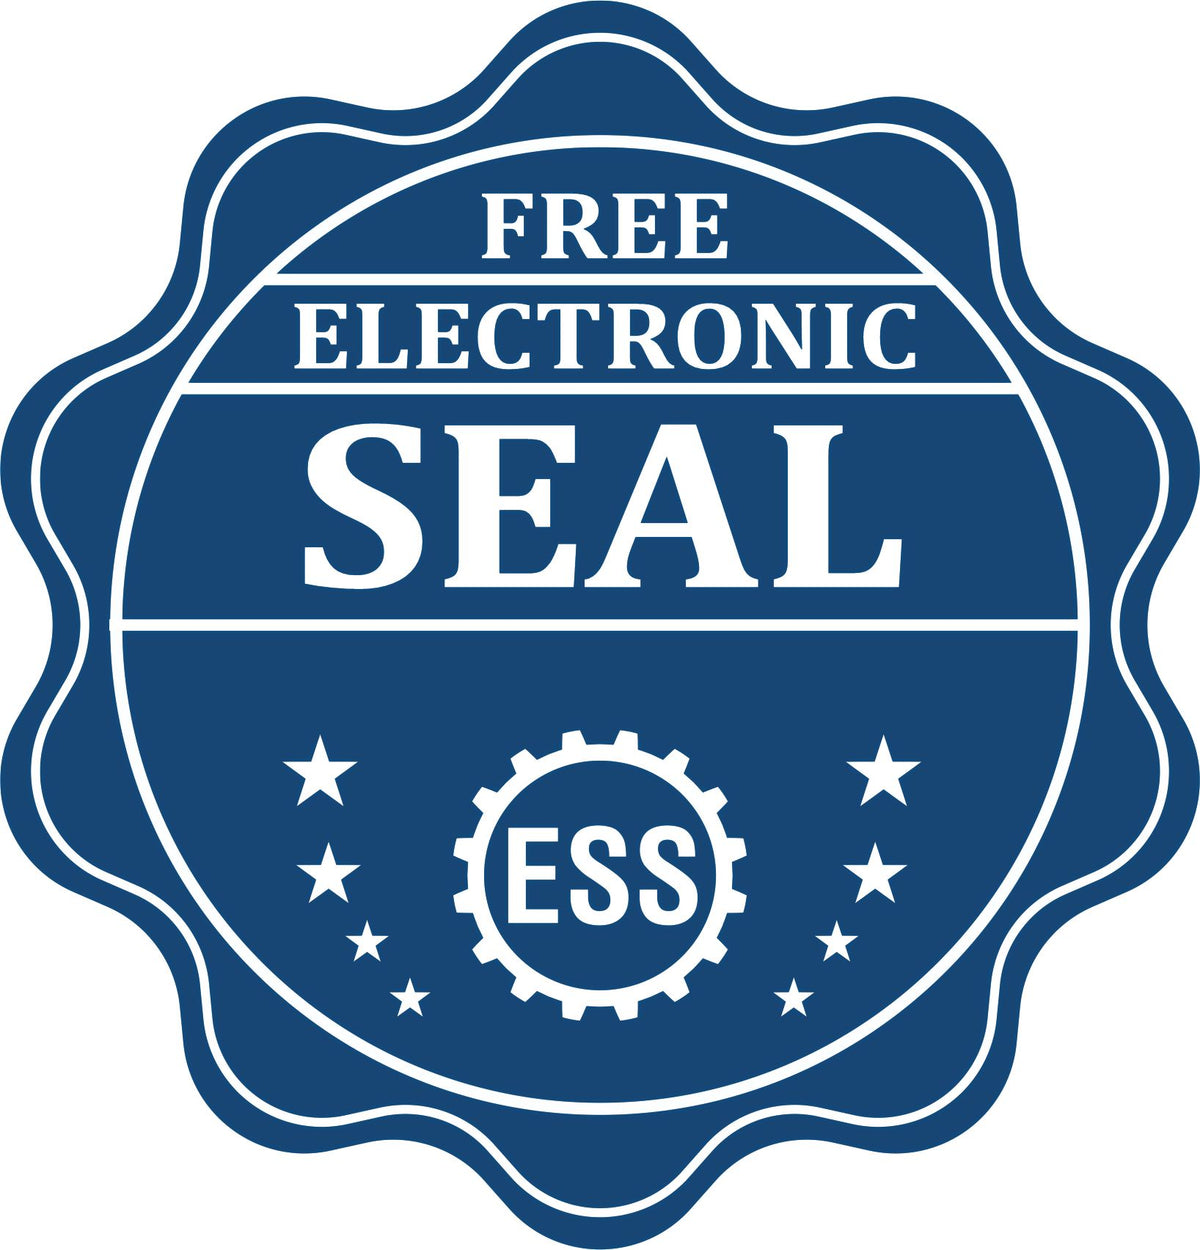 A badge showing a free electronic seal for the Gift Utah Land Surveyor Seal with stars and the ESS gear on the emblem.